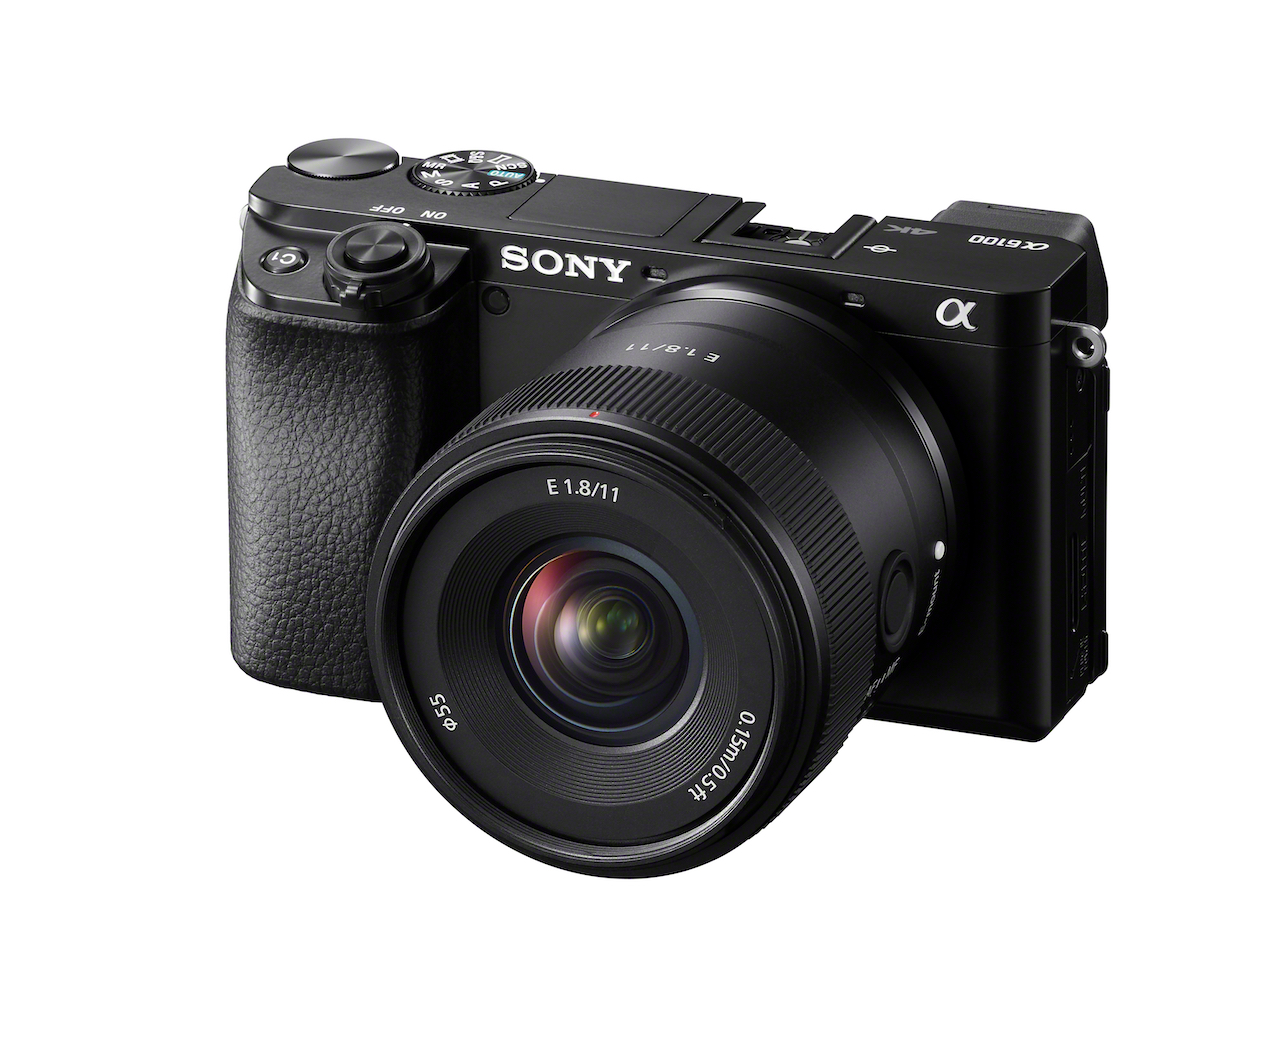 Sony further expands its lens line up with the introduction of the power zoom G lens E PZ 10-20mm F4 G, versatile G lens E 15mm F1.4 G, as well as introducing the ultra-wide prime E 11mm F1.8.